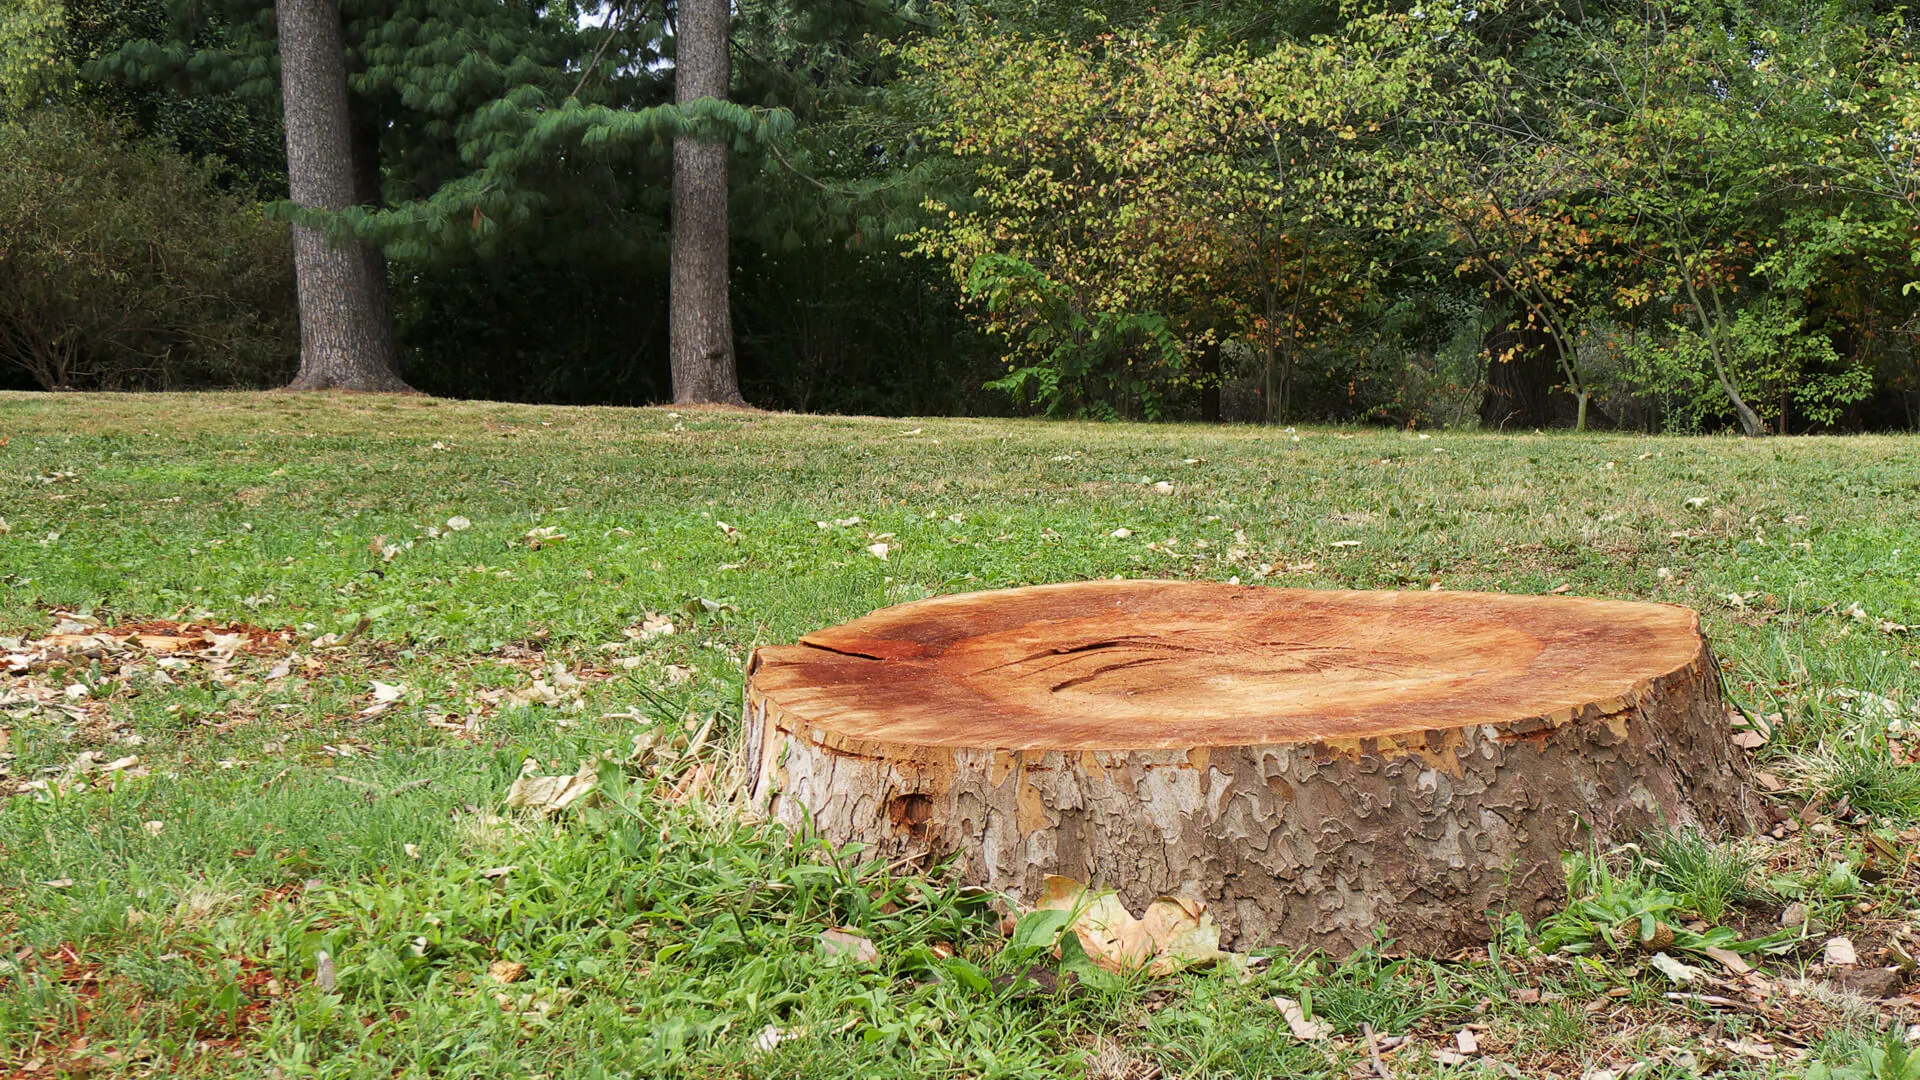 Stump Grinding vs. Removal: What’s the Difference?